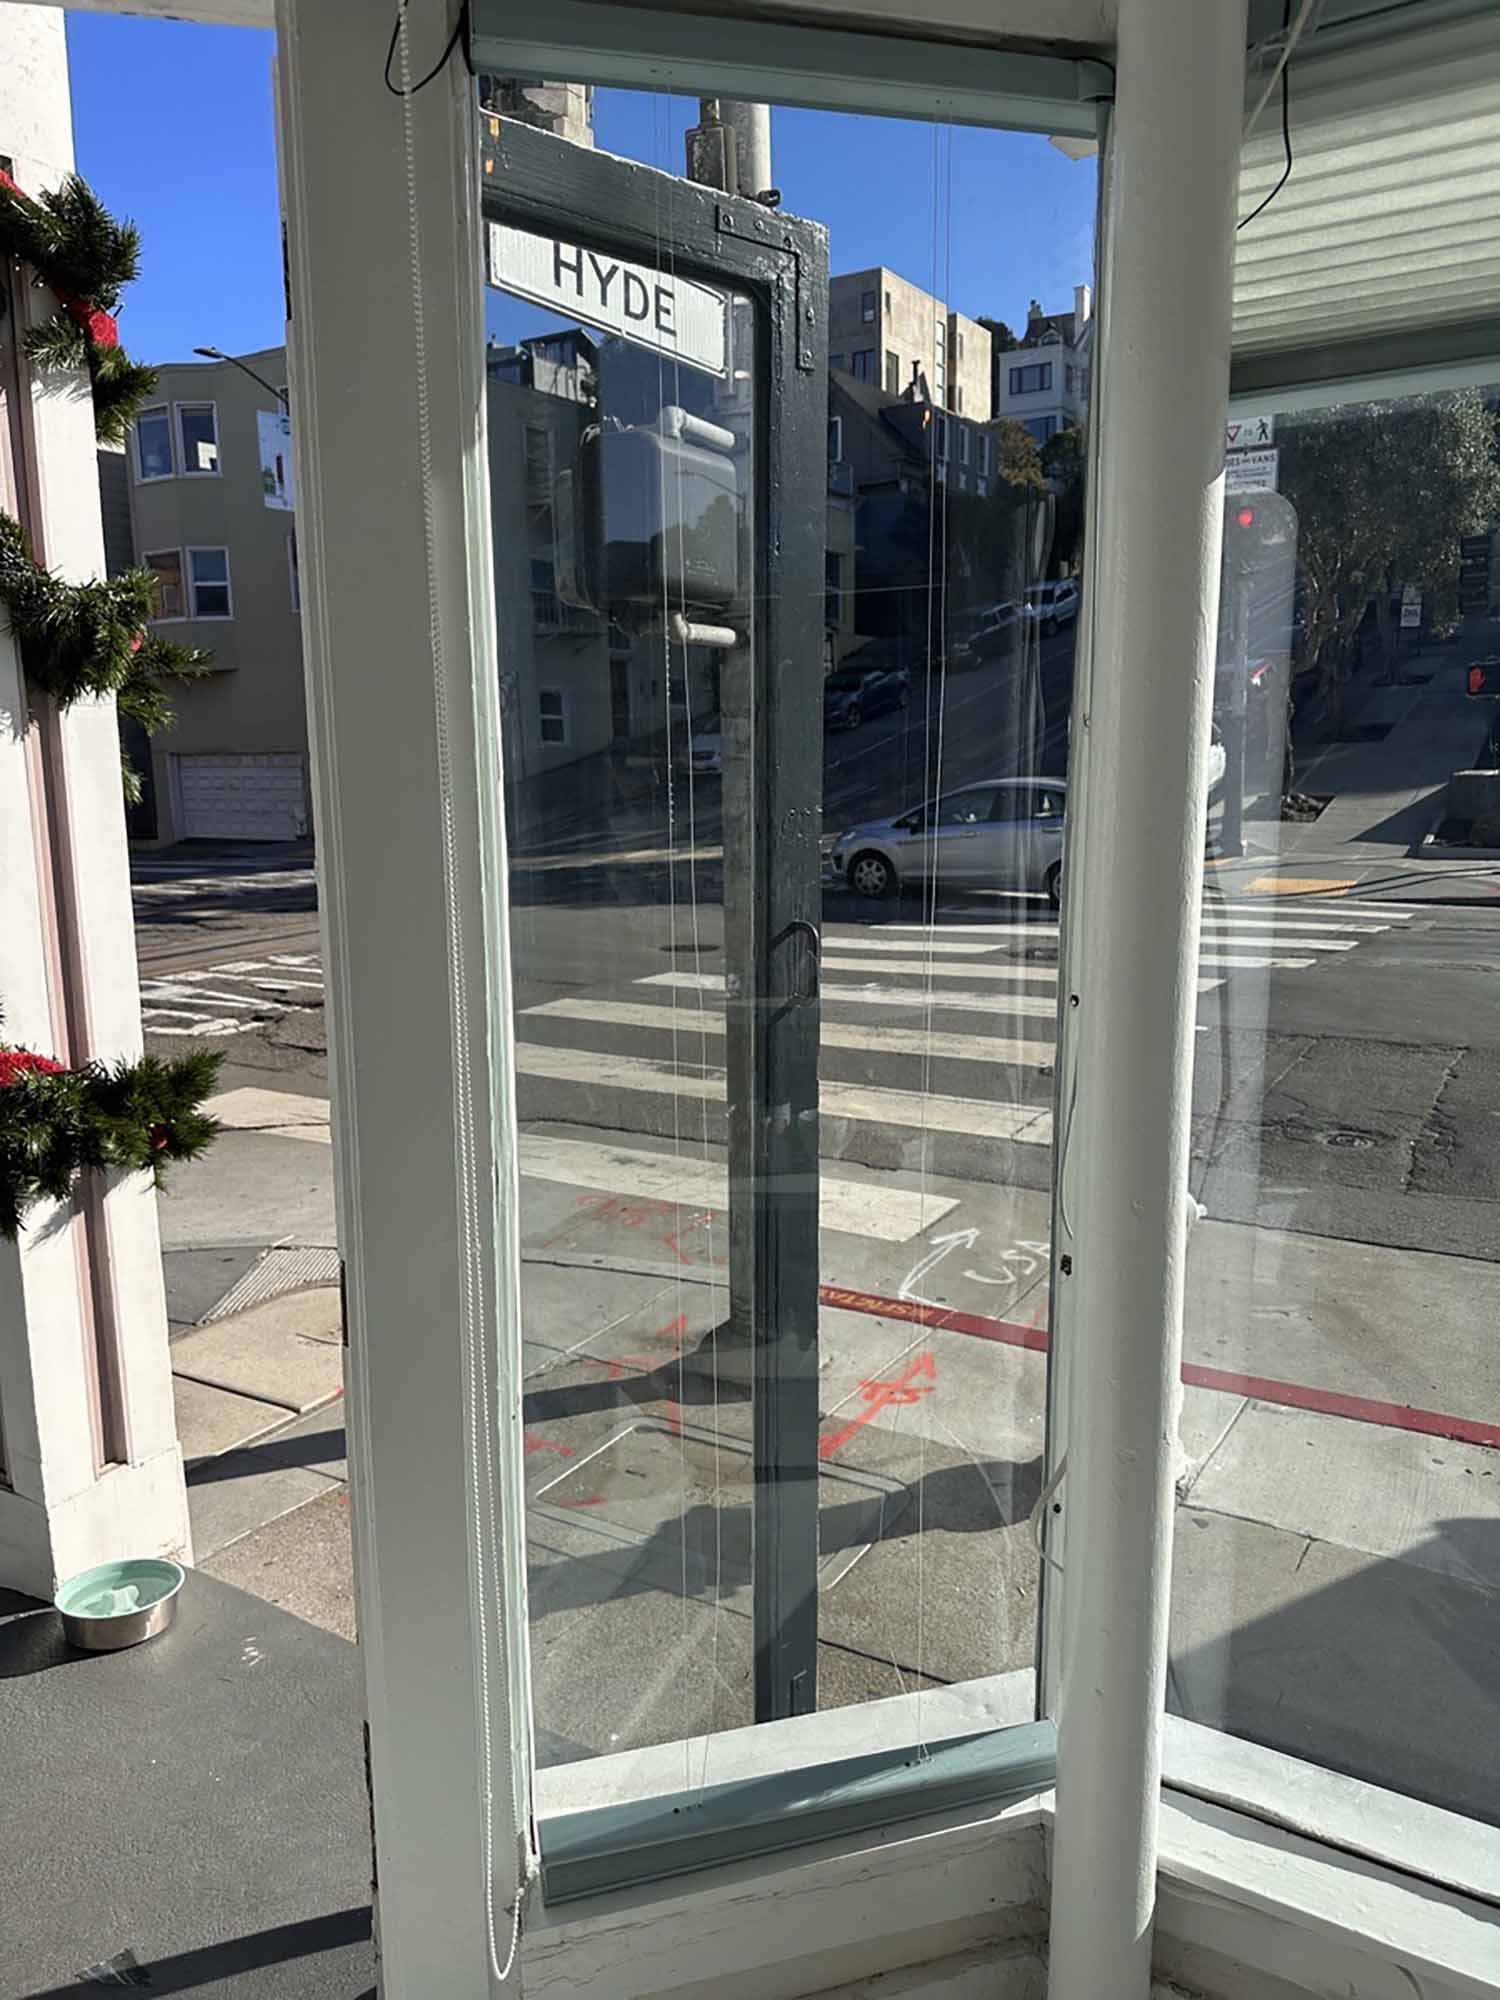 ClimatePro Adds Window Film to a Small Business in San Francisco